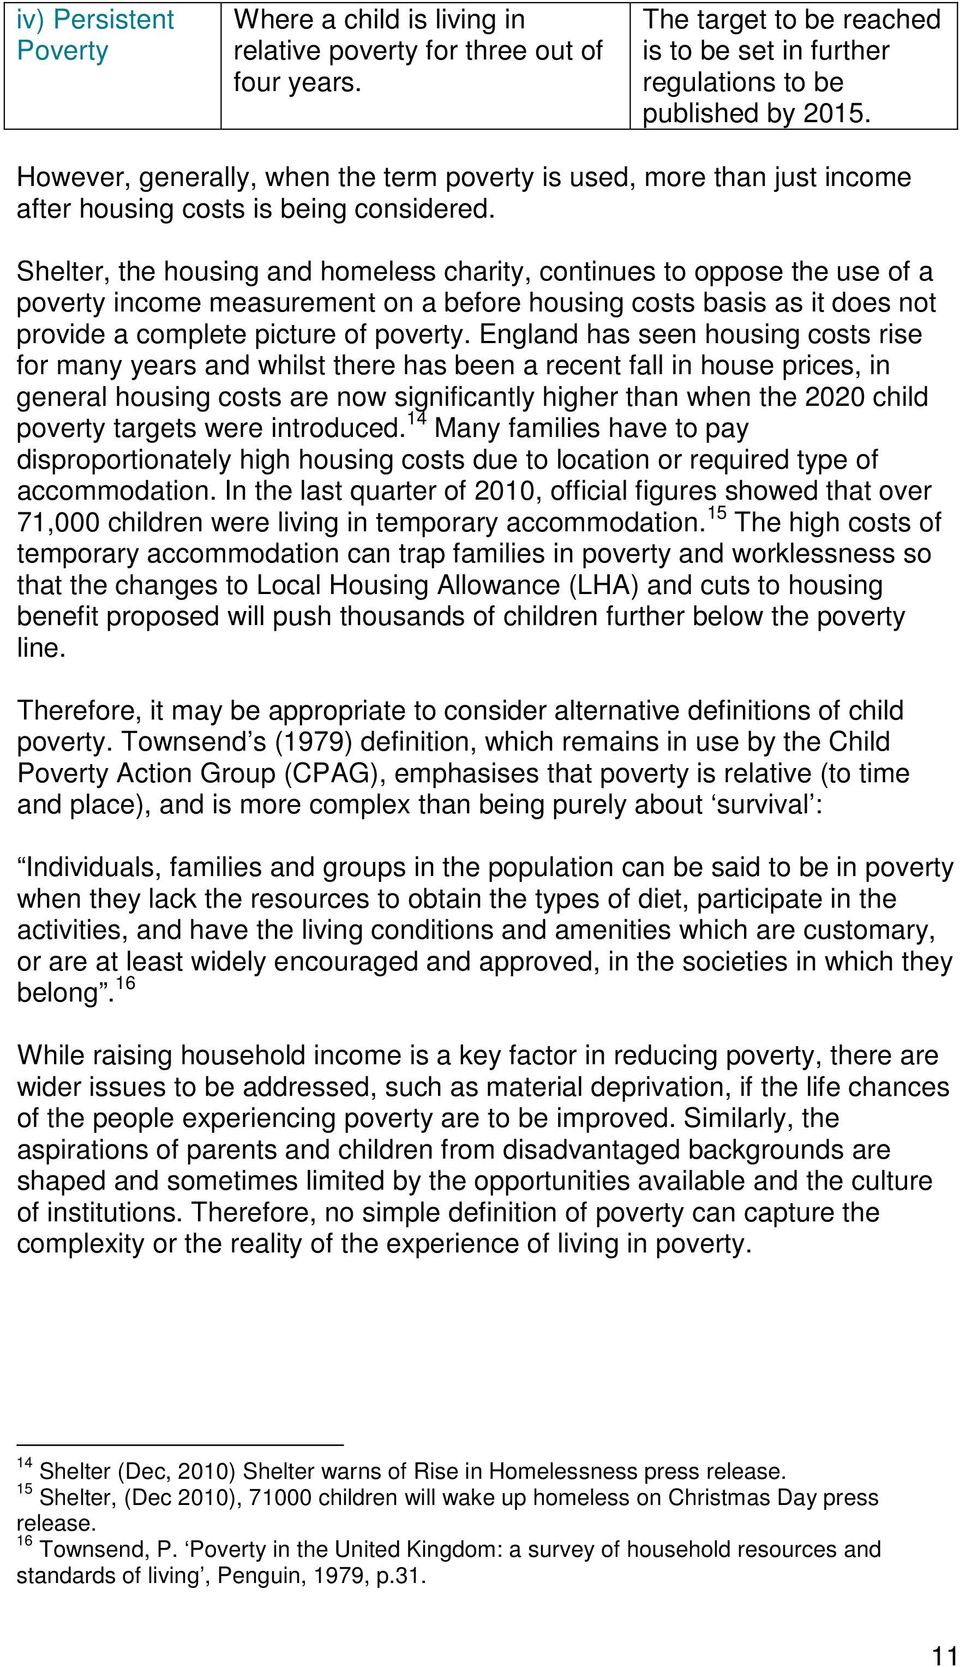 Shelter, the housing and homeless charity, continues to oppose the use of a poverty income measurement on a before housing costs basis as it does not provide a complete picture of poverty.